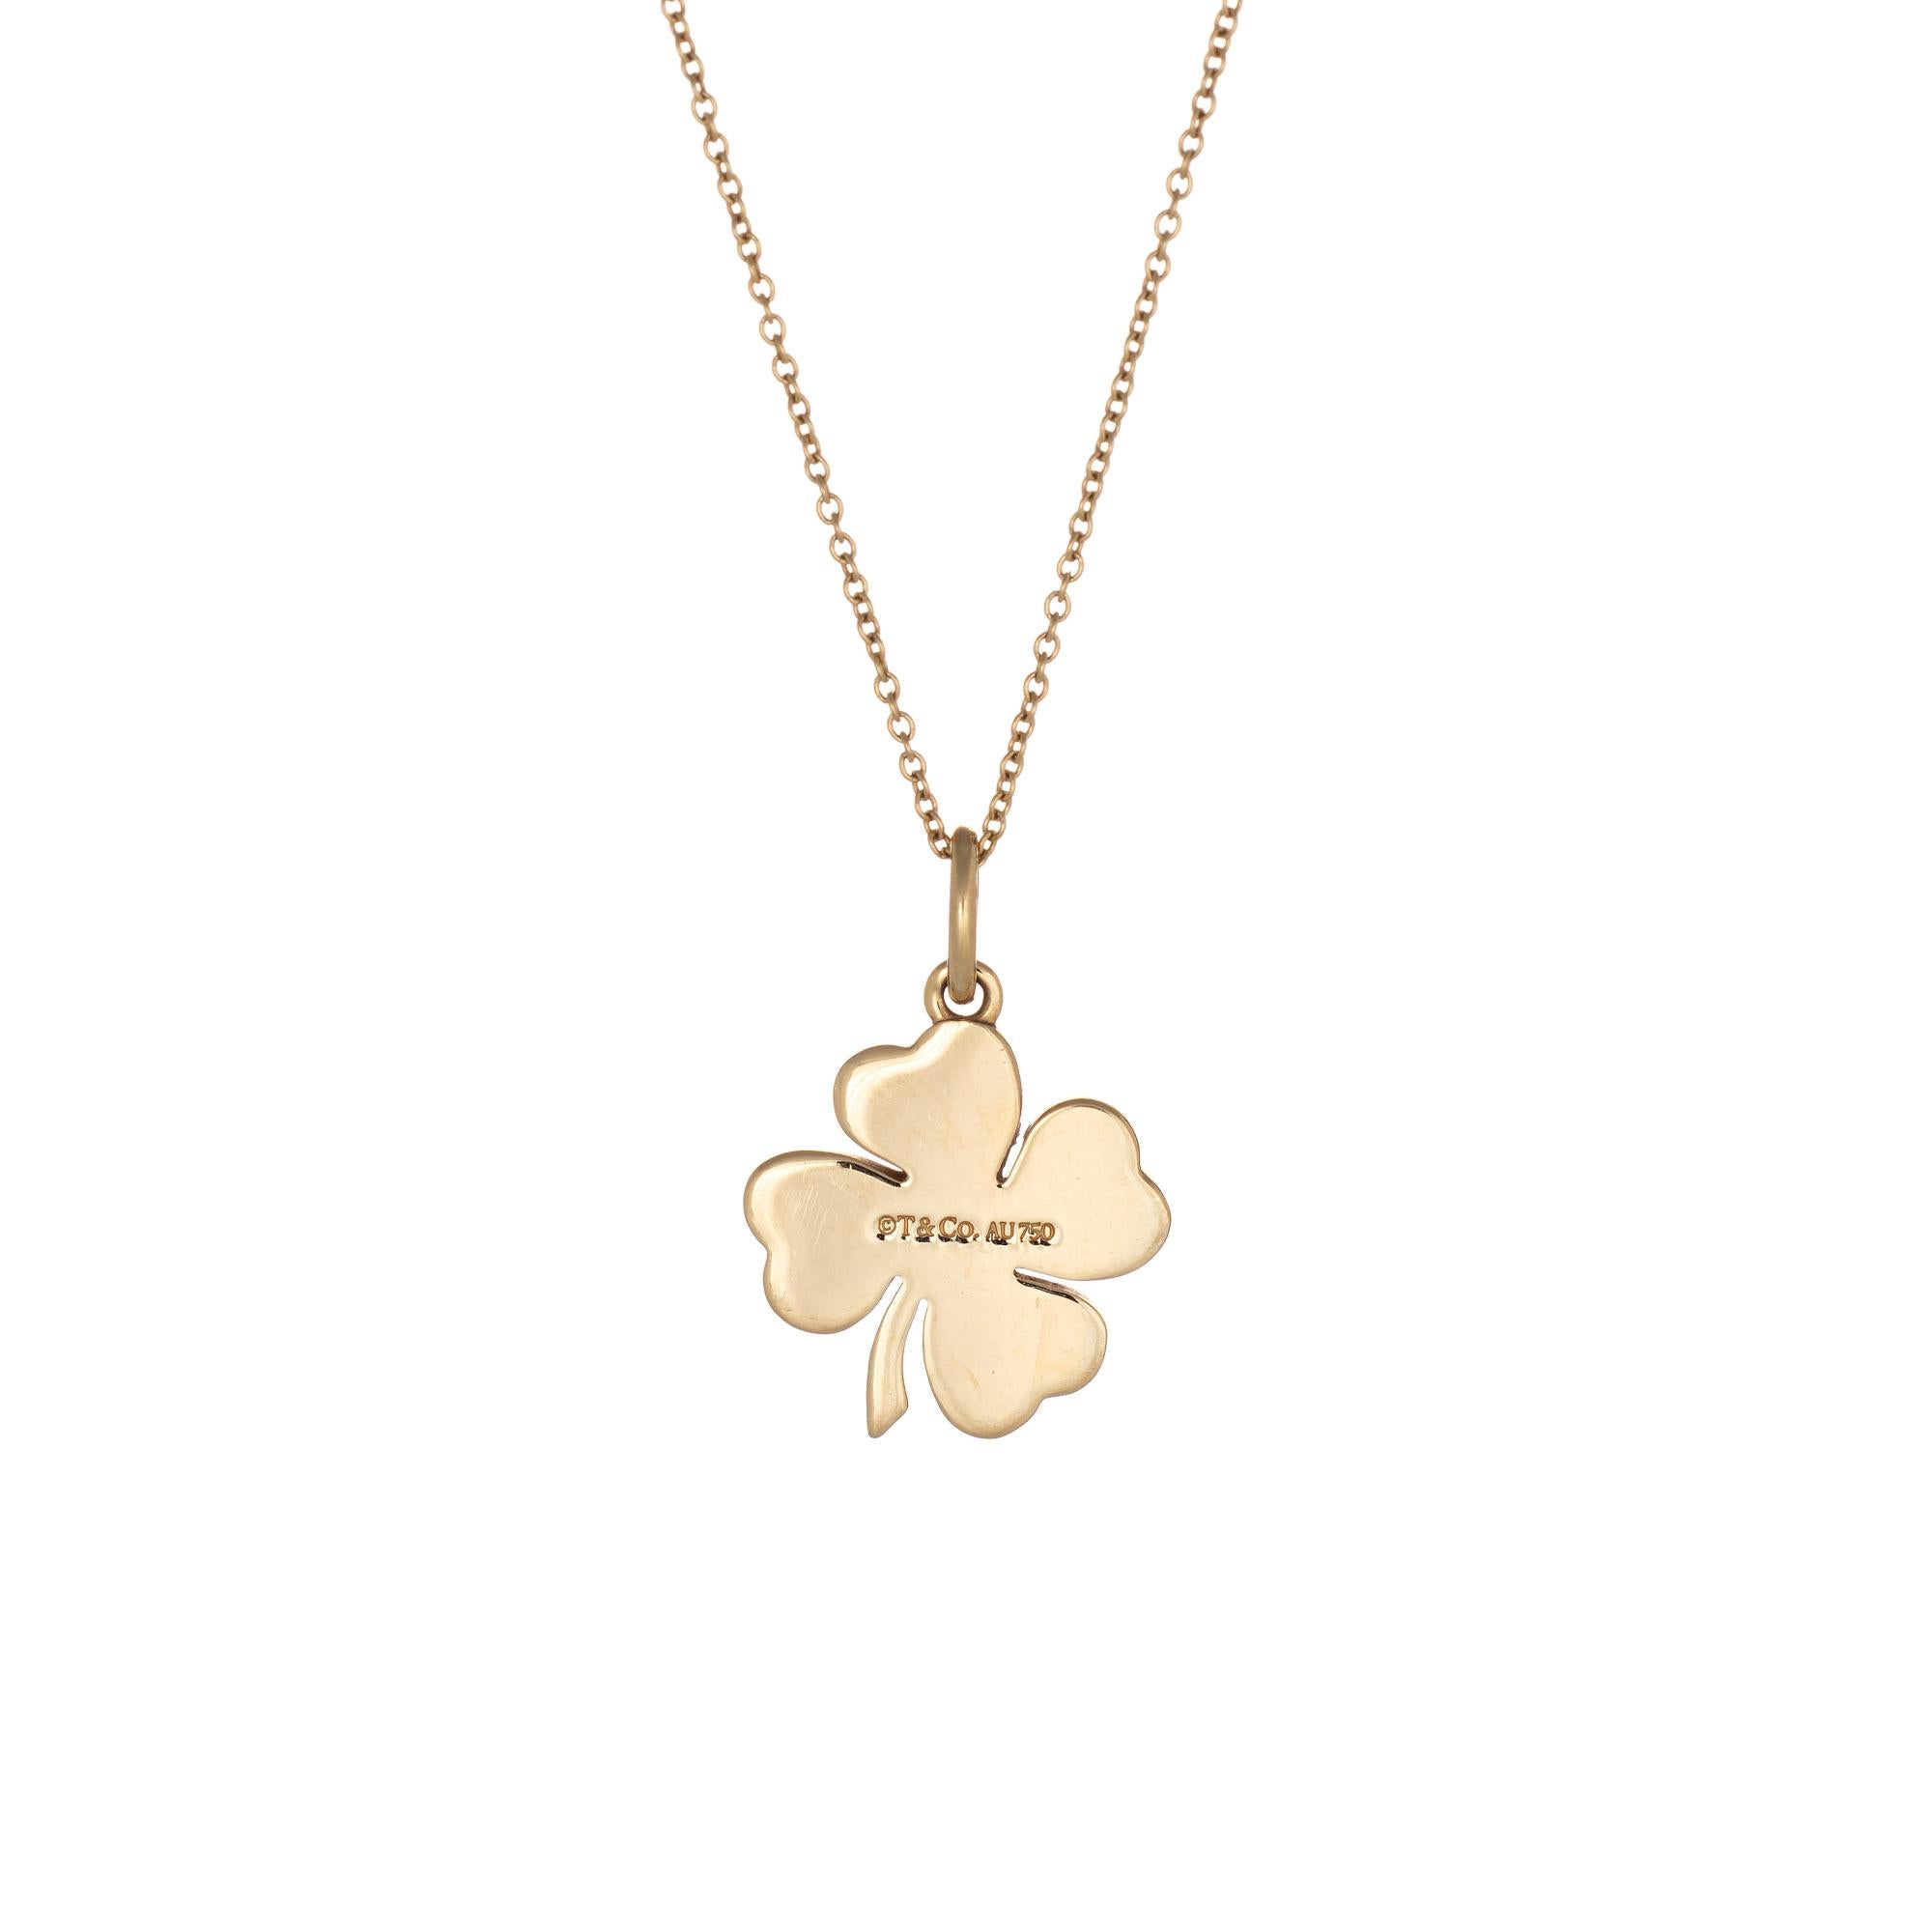 Elegant and finely detailed estate Tiffany & Co four leaf clover pendant & necklace crafted in 18 karat yellow gold.  

The four leaf clover measures 16mm (0.62 inches) and comes with a 18 inch Tiffany & Co chain.  

The clover is currently